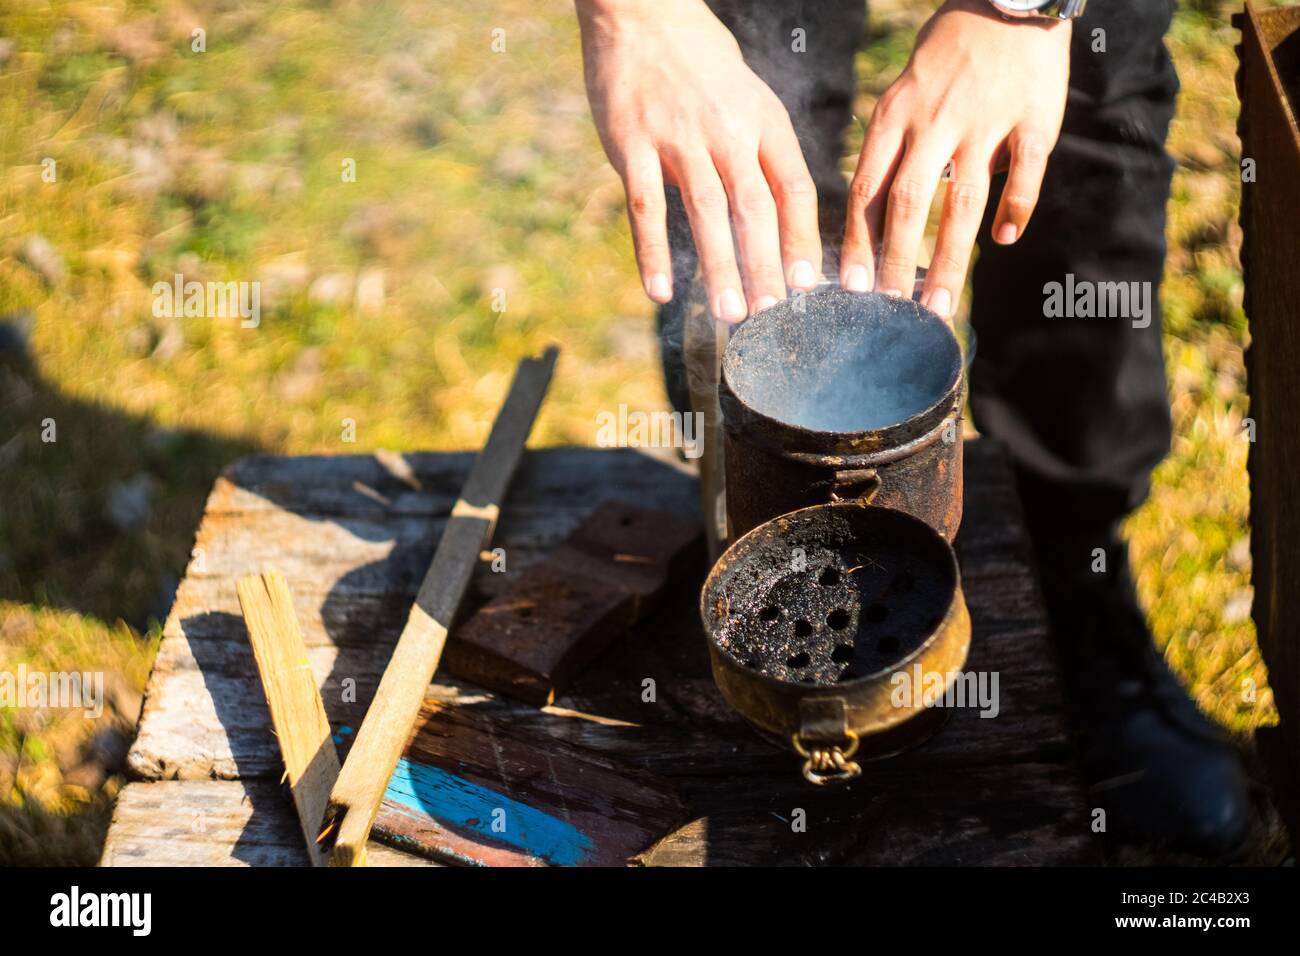 A beekeeper preparing smoker for bee control Stock Photo